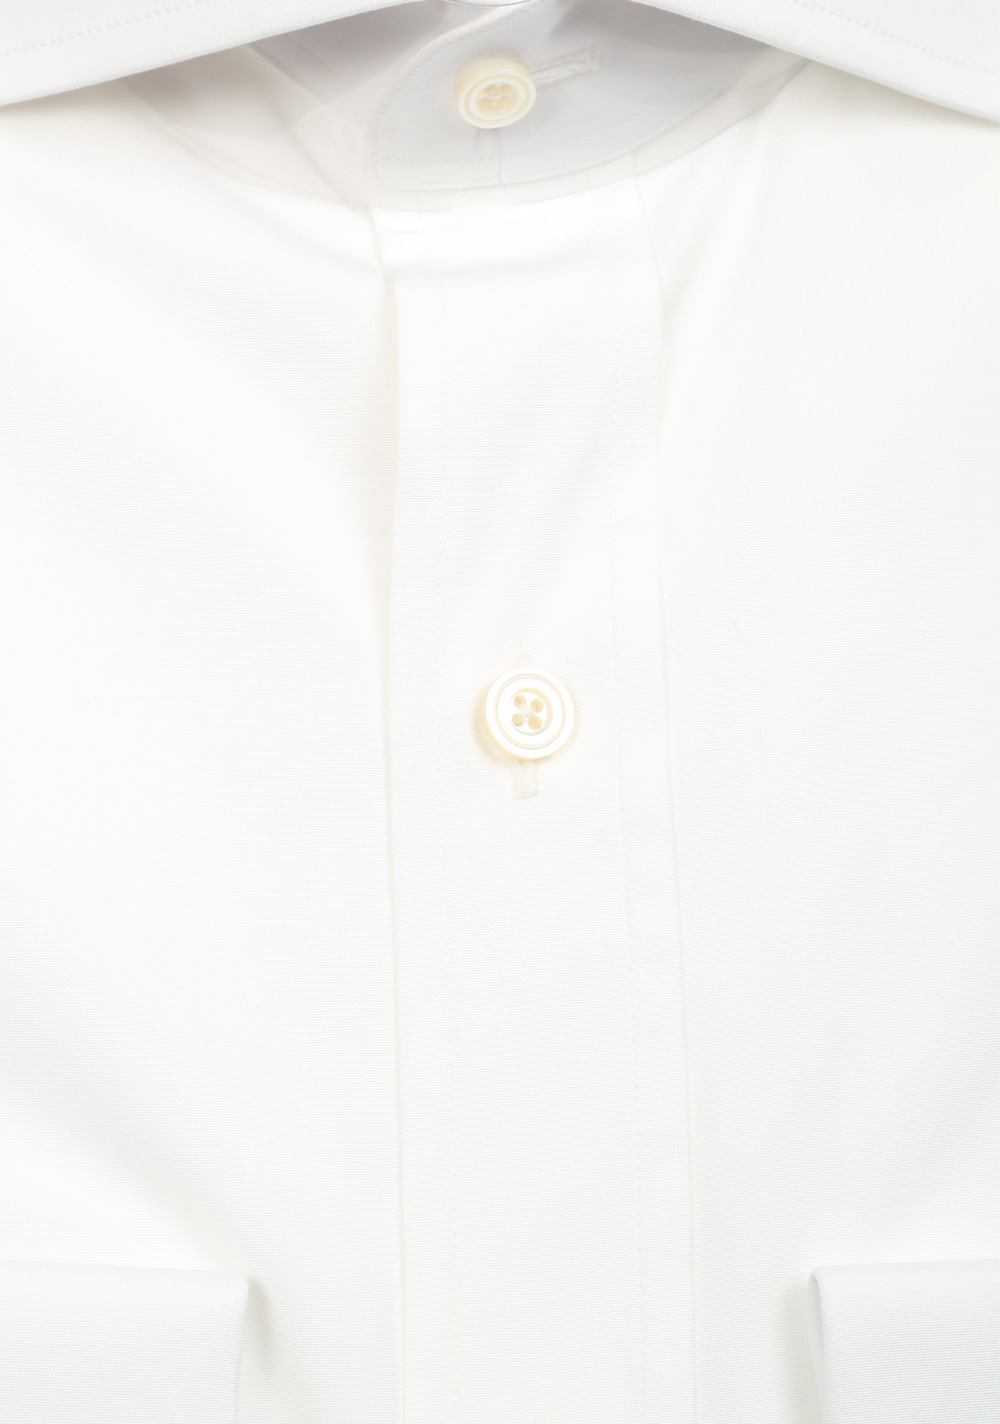 TOM FORD Solid White Dress Shirt French Cuffs Size 44 / 17,5 U.S. Slim Fit | Costume Limité